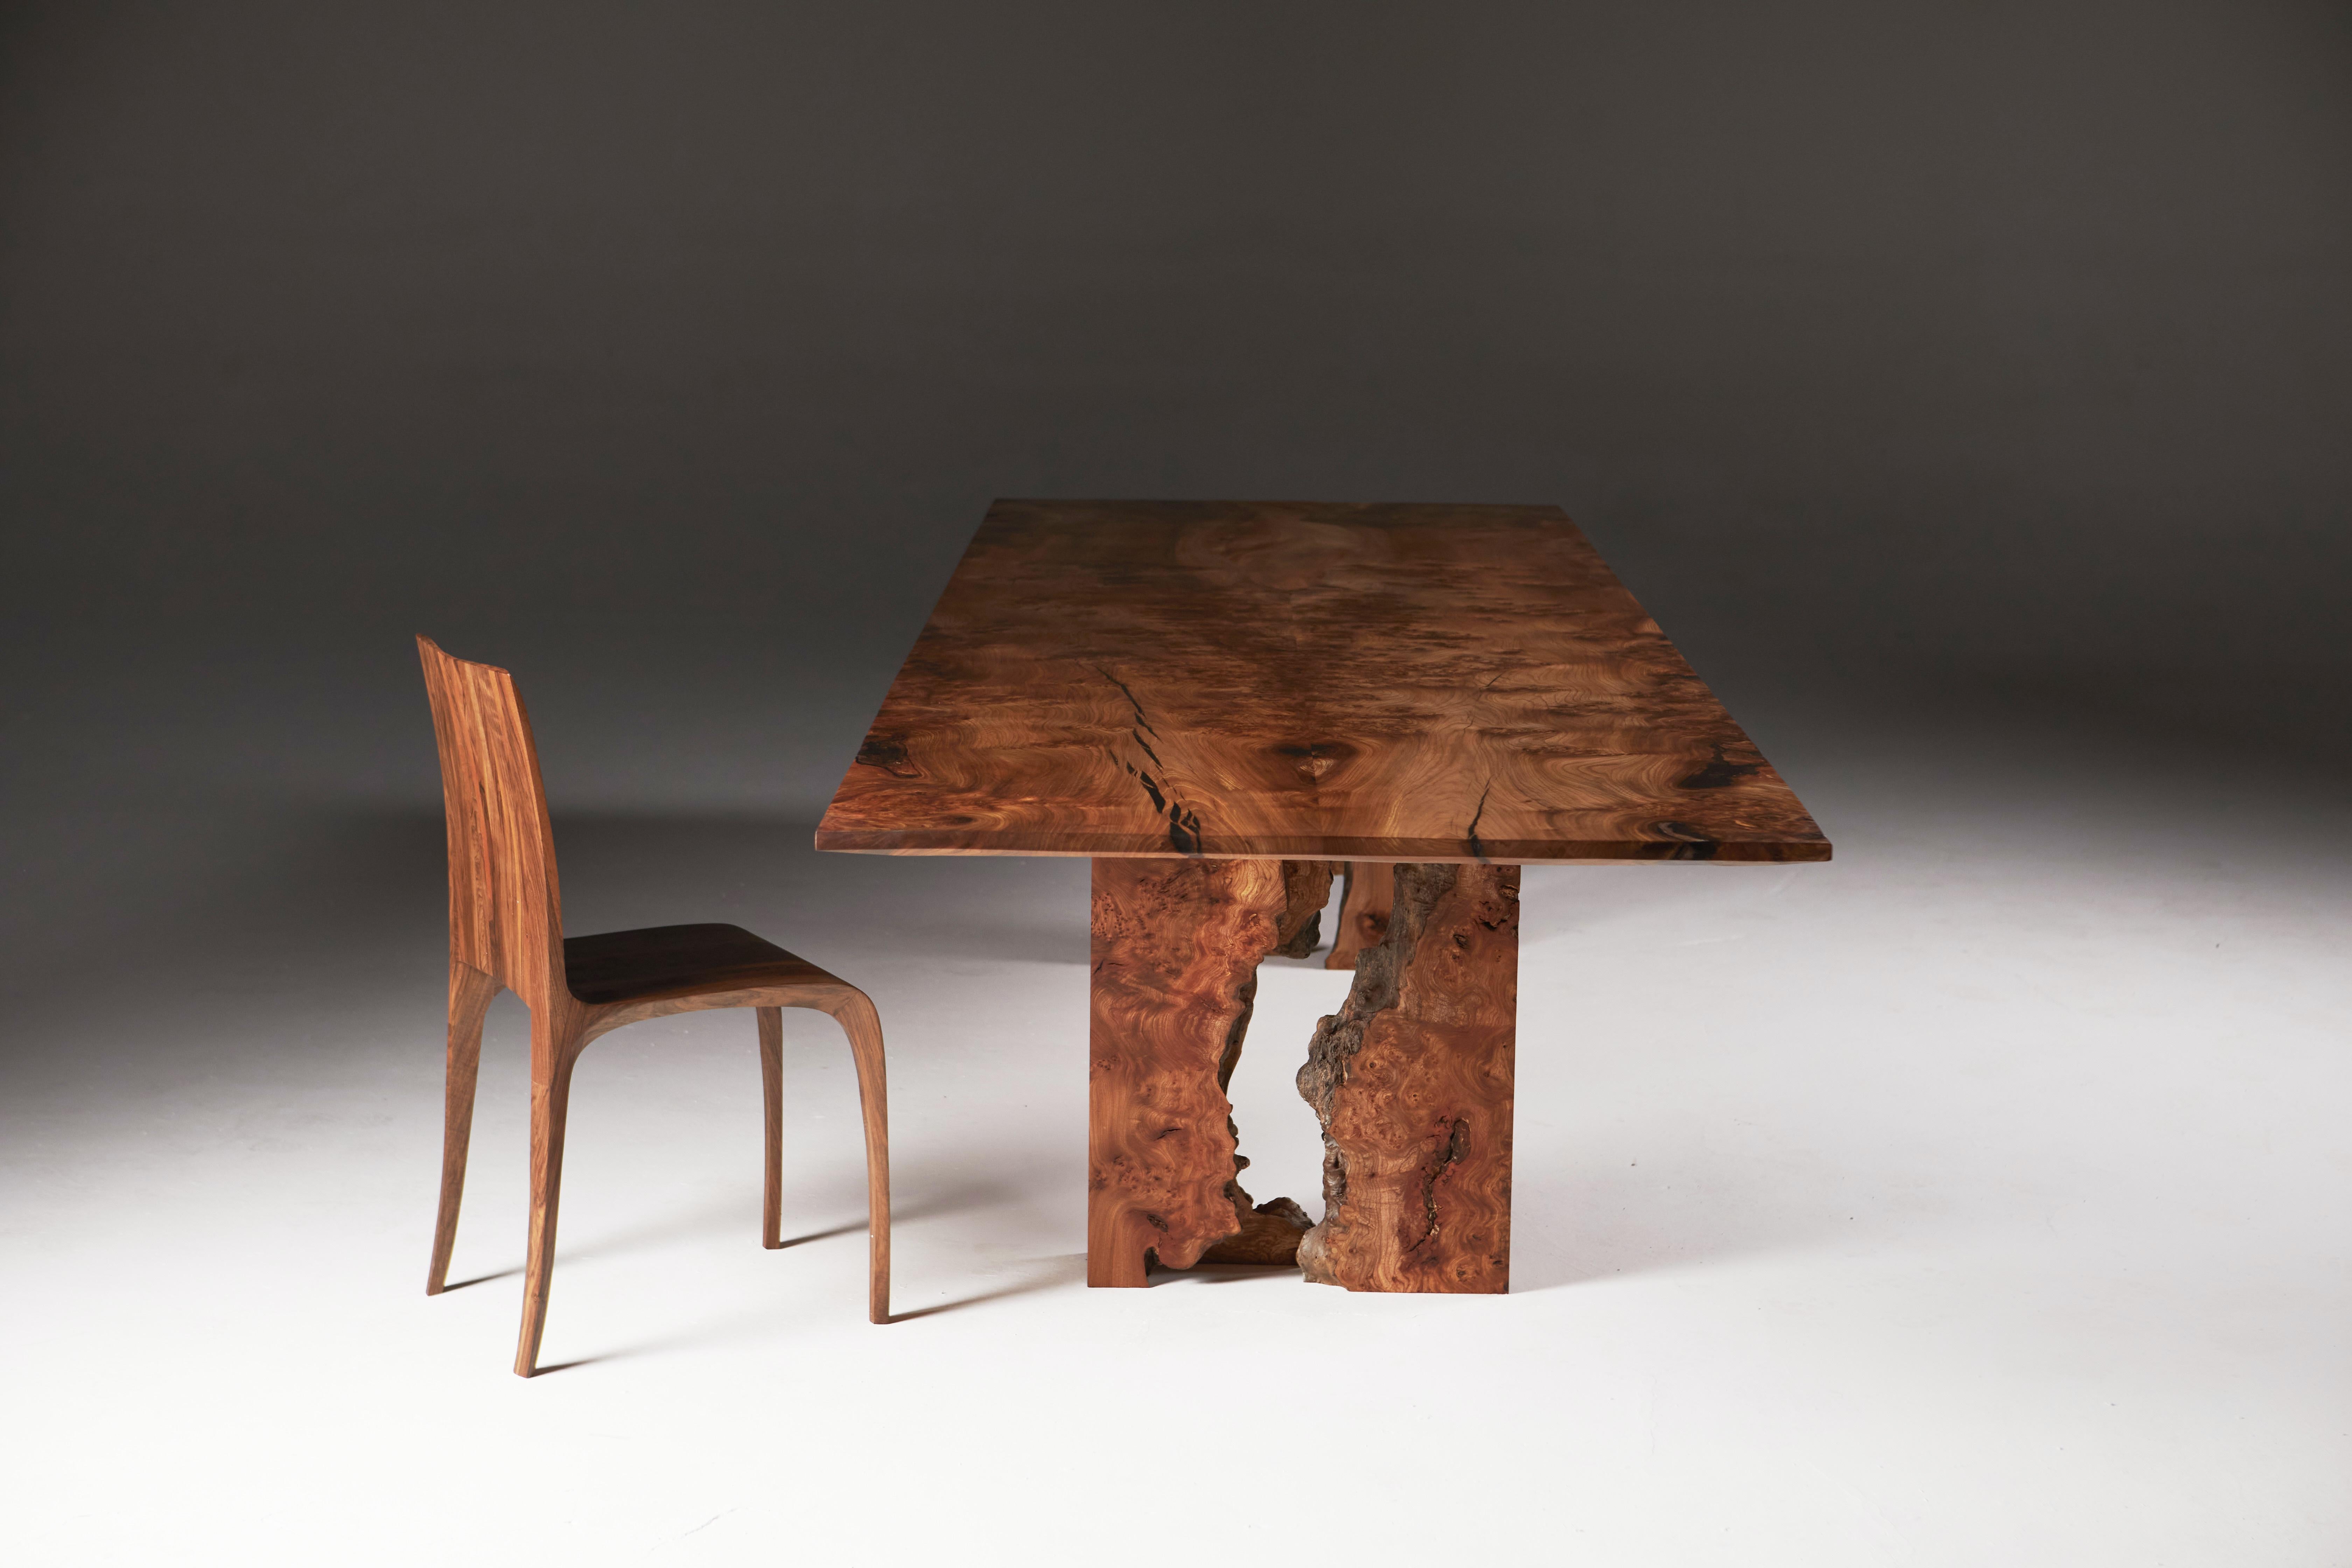 Scottish Burr Elm Table with Inverted Live Edge Legs and Book-matched Top.  5